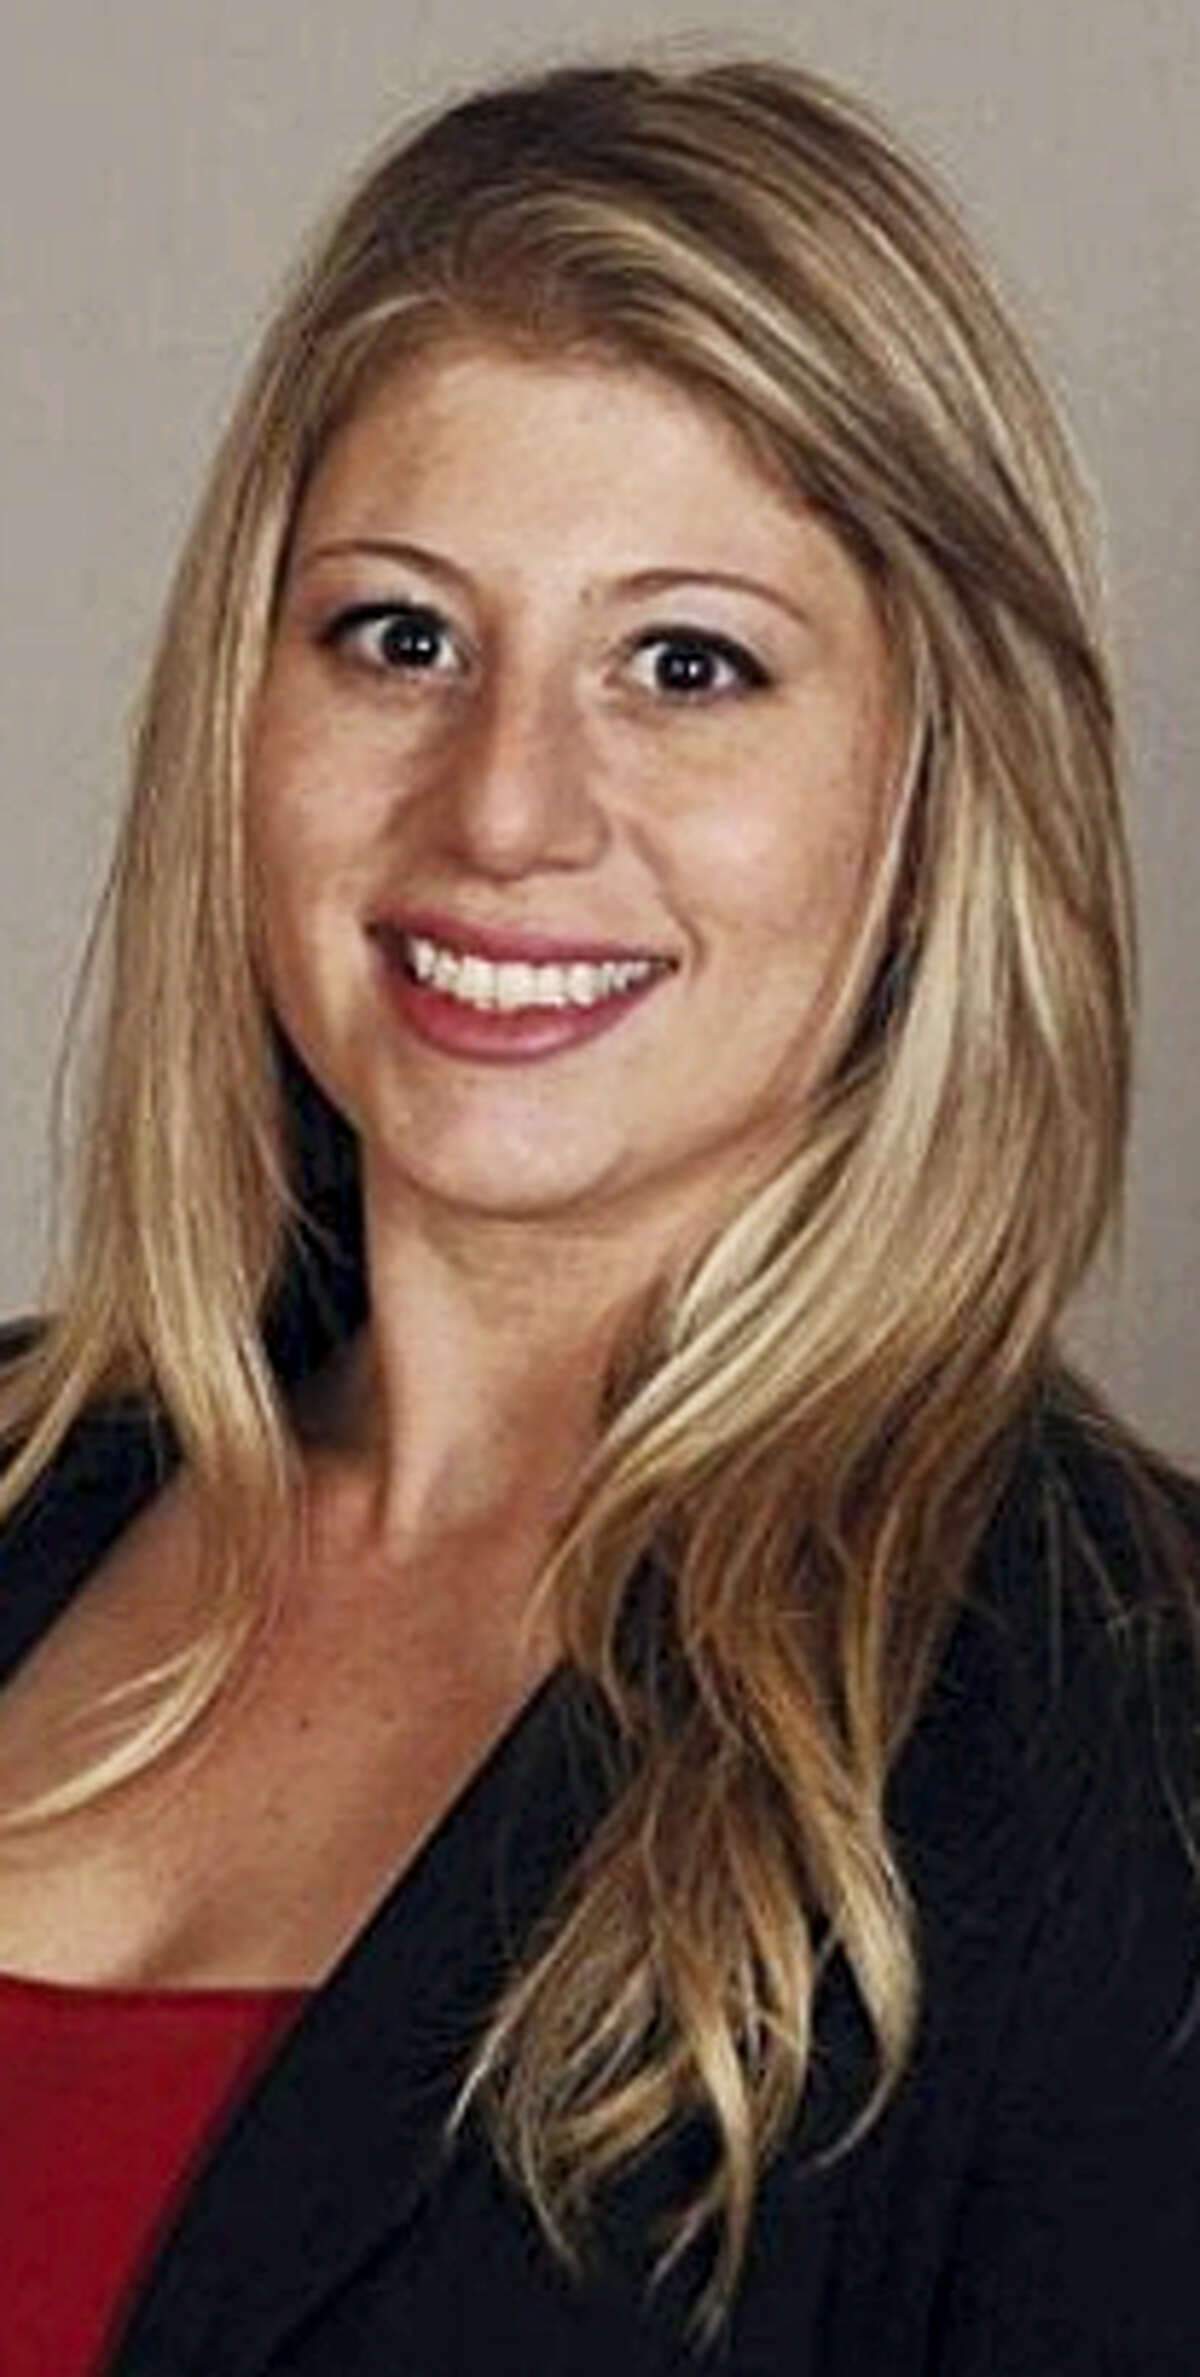 MIDDLETOWN, CT — Geena Dinos has rejoined Liberty Bank as assistant vice President, responsible for the Cromwell Main branch.She was formerly a personal banker in Liberty’s Clinton branch in 2011. Since that time, she served in a branch management capacity for Farmington Bank in Wethersfield, ending as branch manager for Farmington’s startup location in Rocky Hill. Ms. Dinos has also worked for TD Bank.Ms. Dinos is in the 2016 class of the Connecticut School of Finance and Management, and holds an associate’s degree from the New England School of Business.She is the current president of the Rocky Hill Chamber of Commerce, and has volunteered for Junior Achievement, the United Way and the Special Olympics. She resides in Middletown.